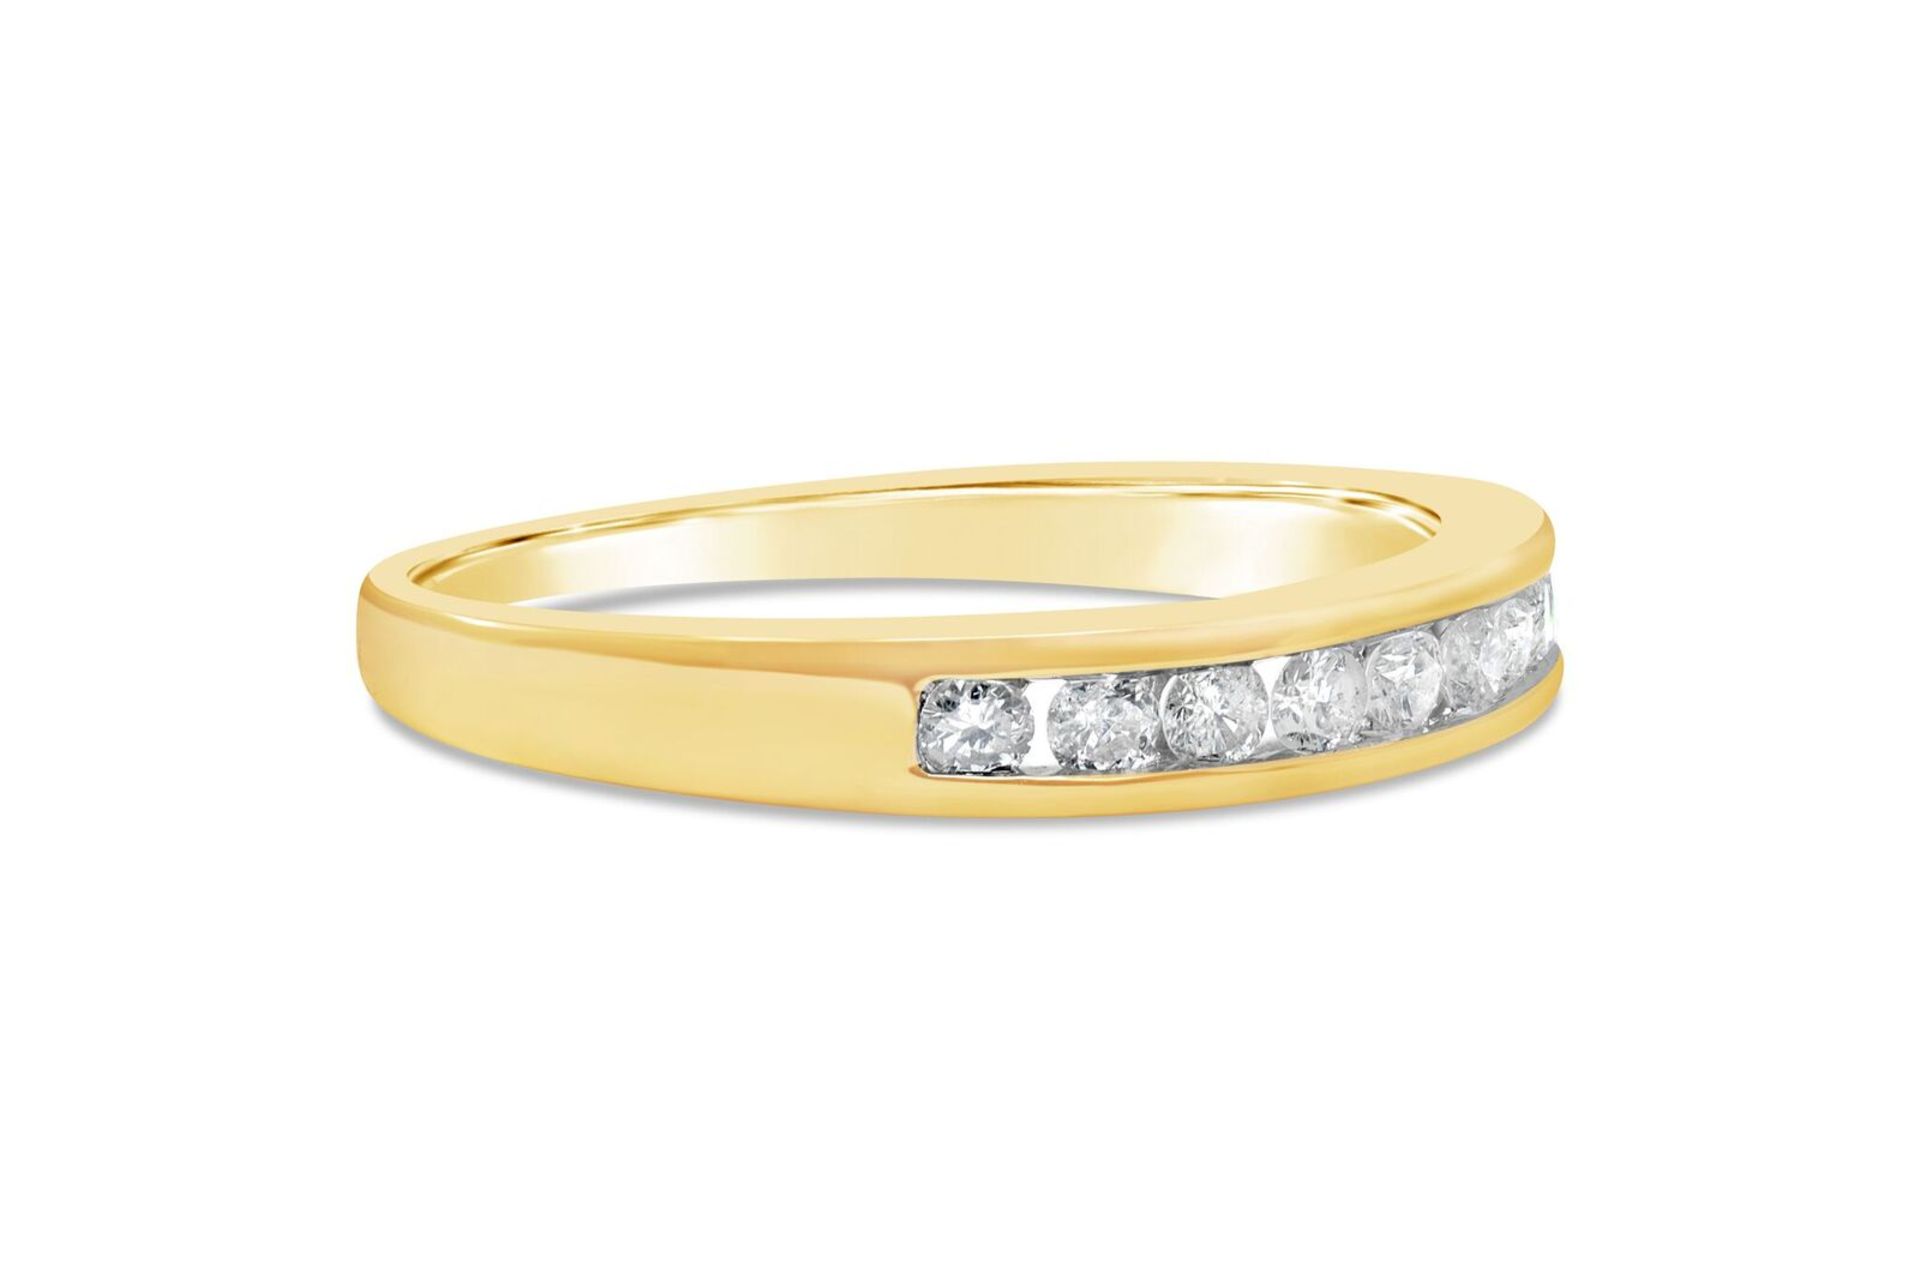 Diamond Channel Eternity Ring, 9ct Yellow Gold RRP £849 Weight 1.58g, Diamond Weight 0.25ct,